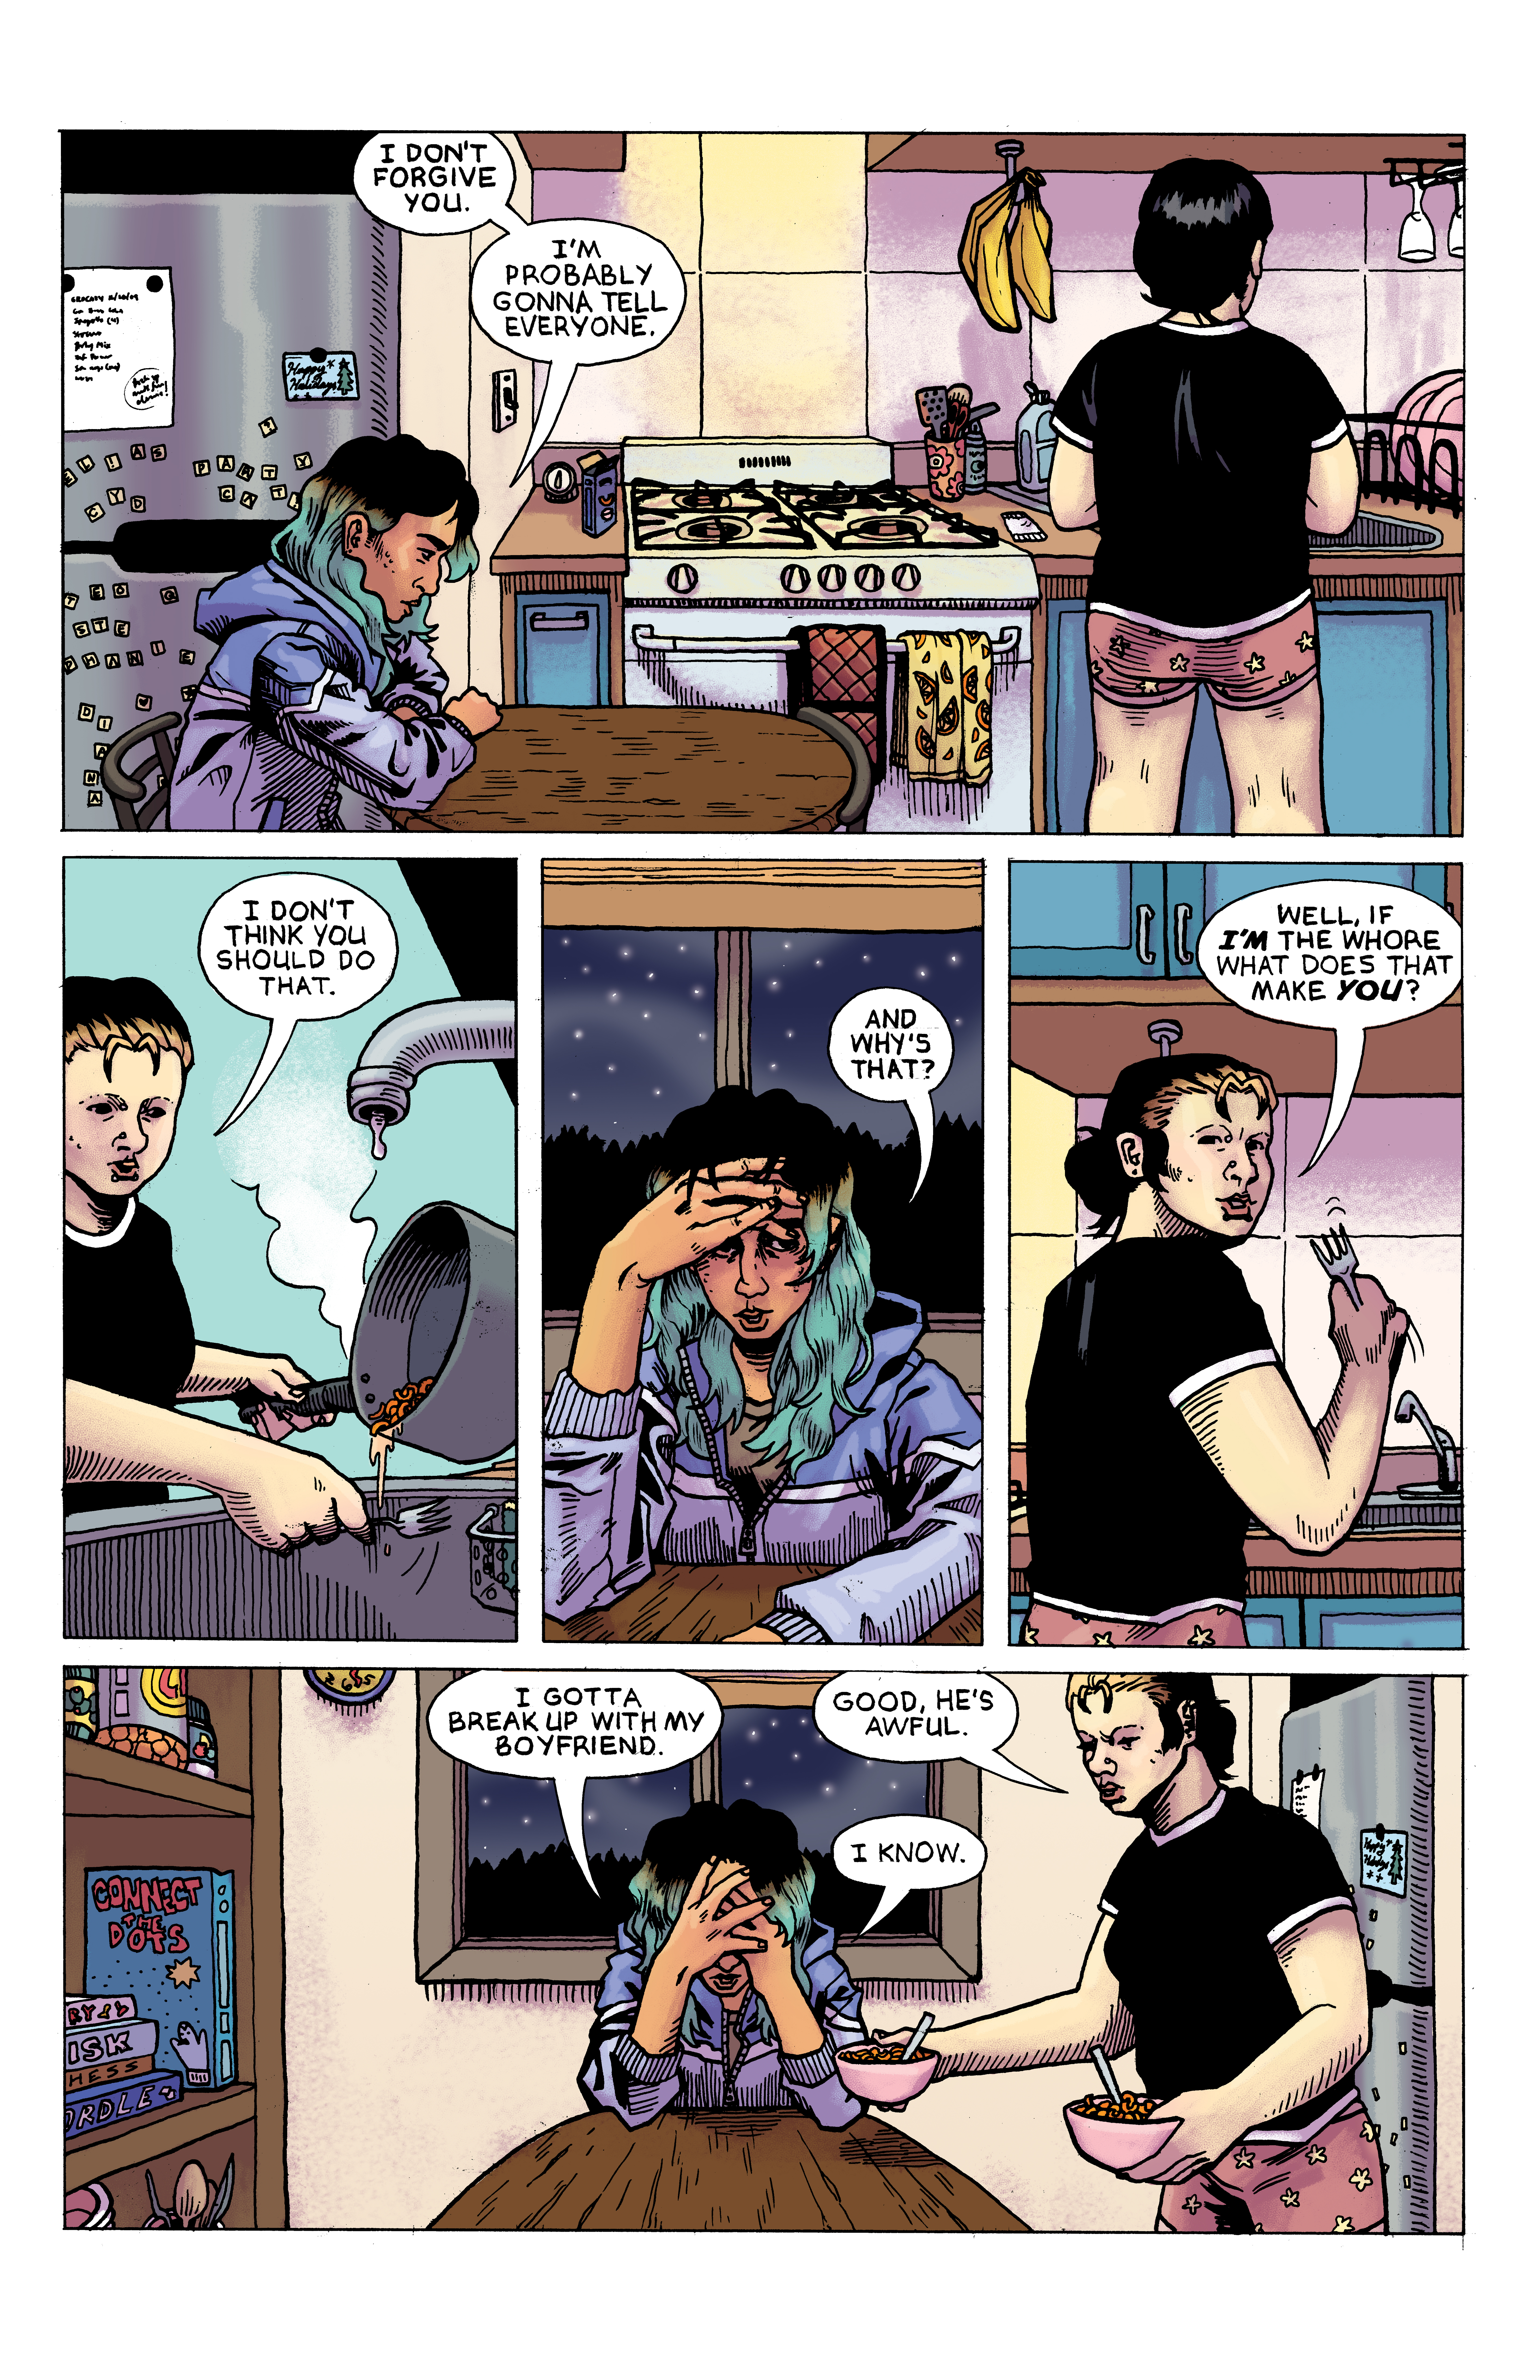 A color comics page depicting a five panel sequence of a teen girl making box mac and cheese and talking with her friend. She encourages her friend not to tell their secret and to break up with her boyfriend.